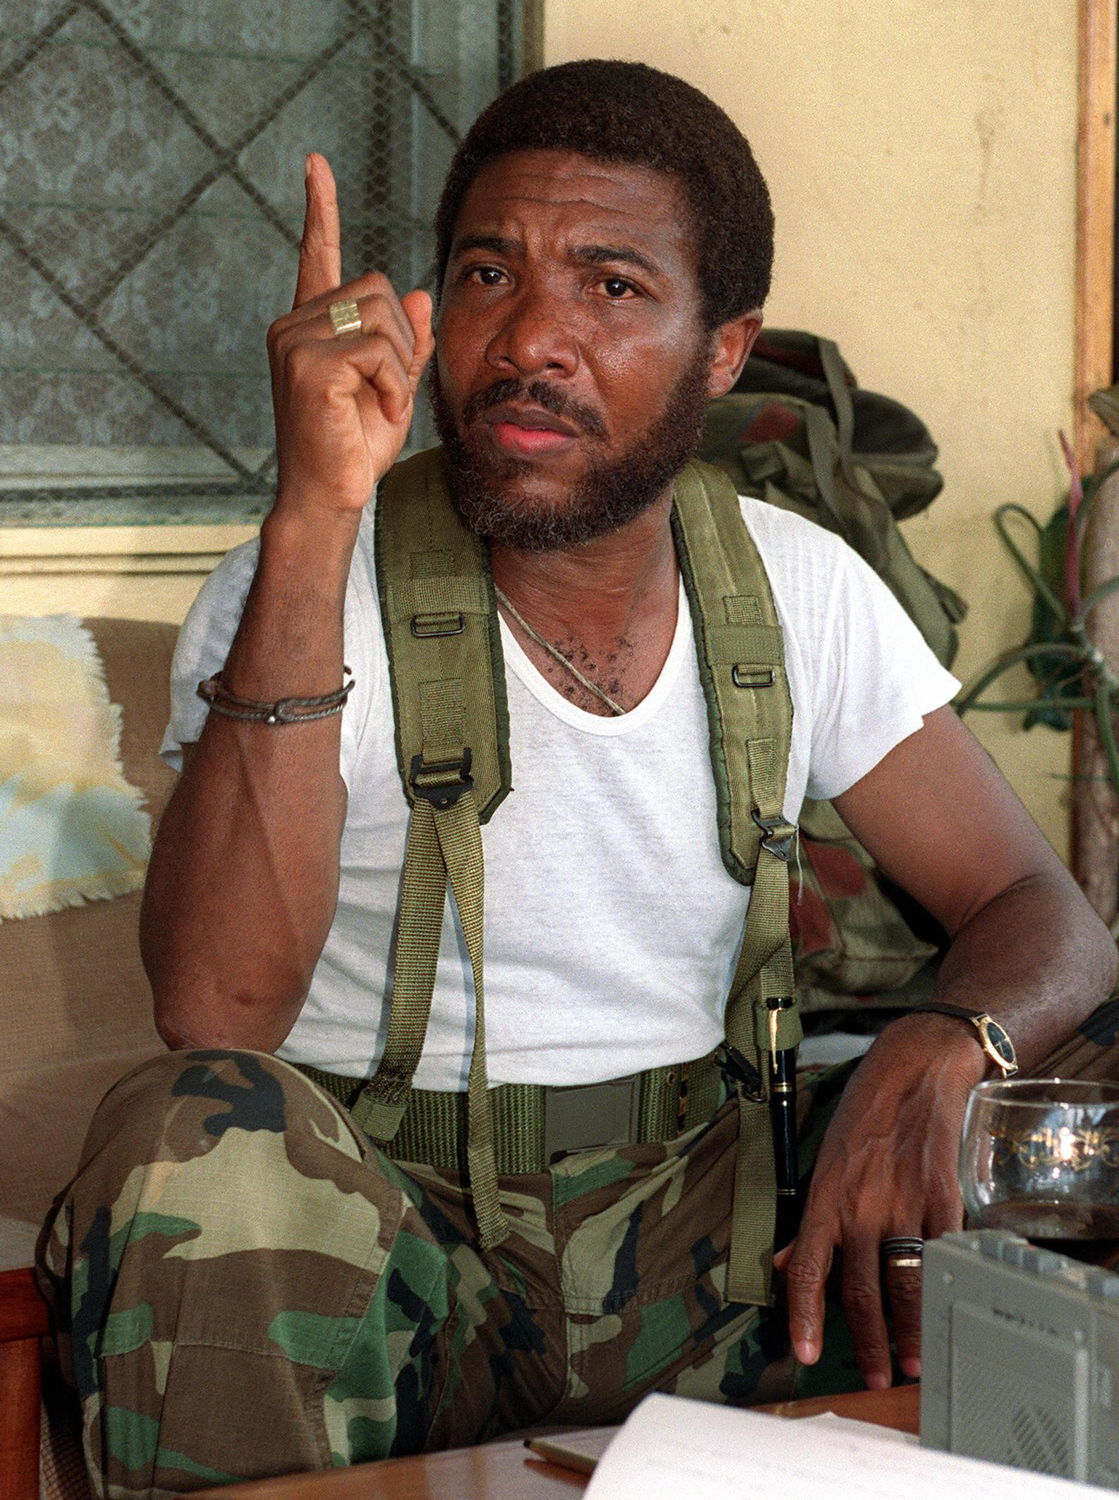 A man in military camouflage vest gestures with one finger raised, sitting in front of a patterned curtain, with a microphone visible in the foreground.